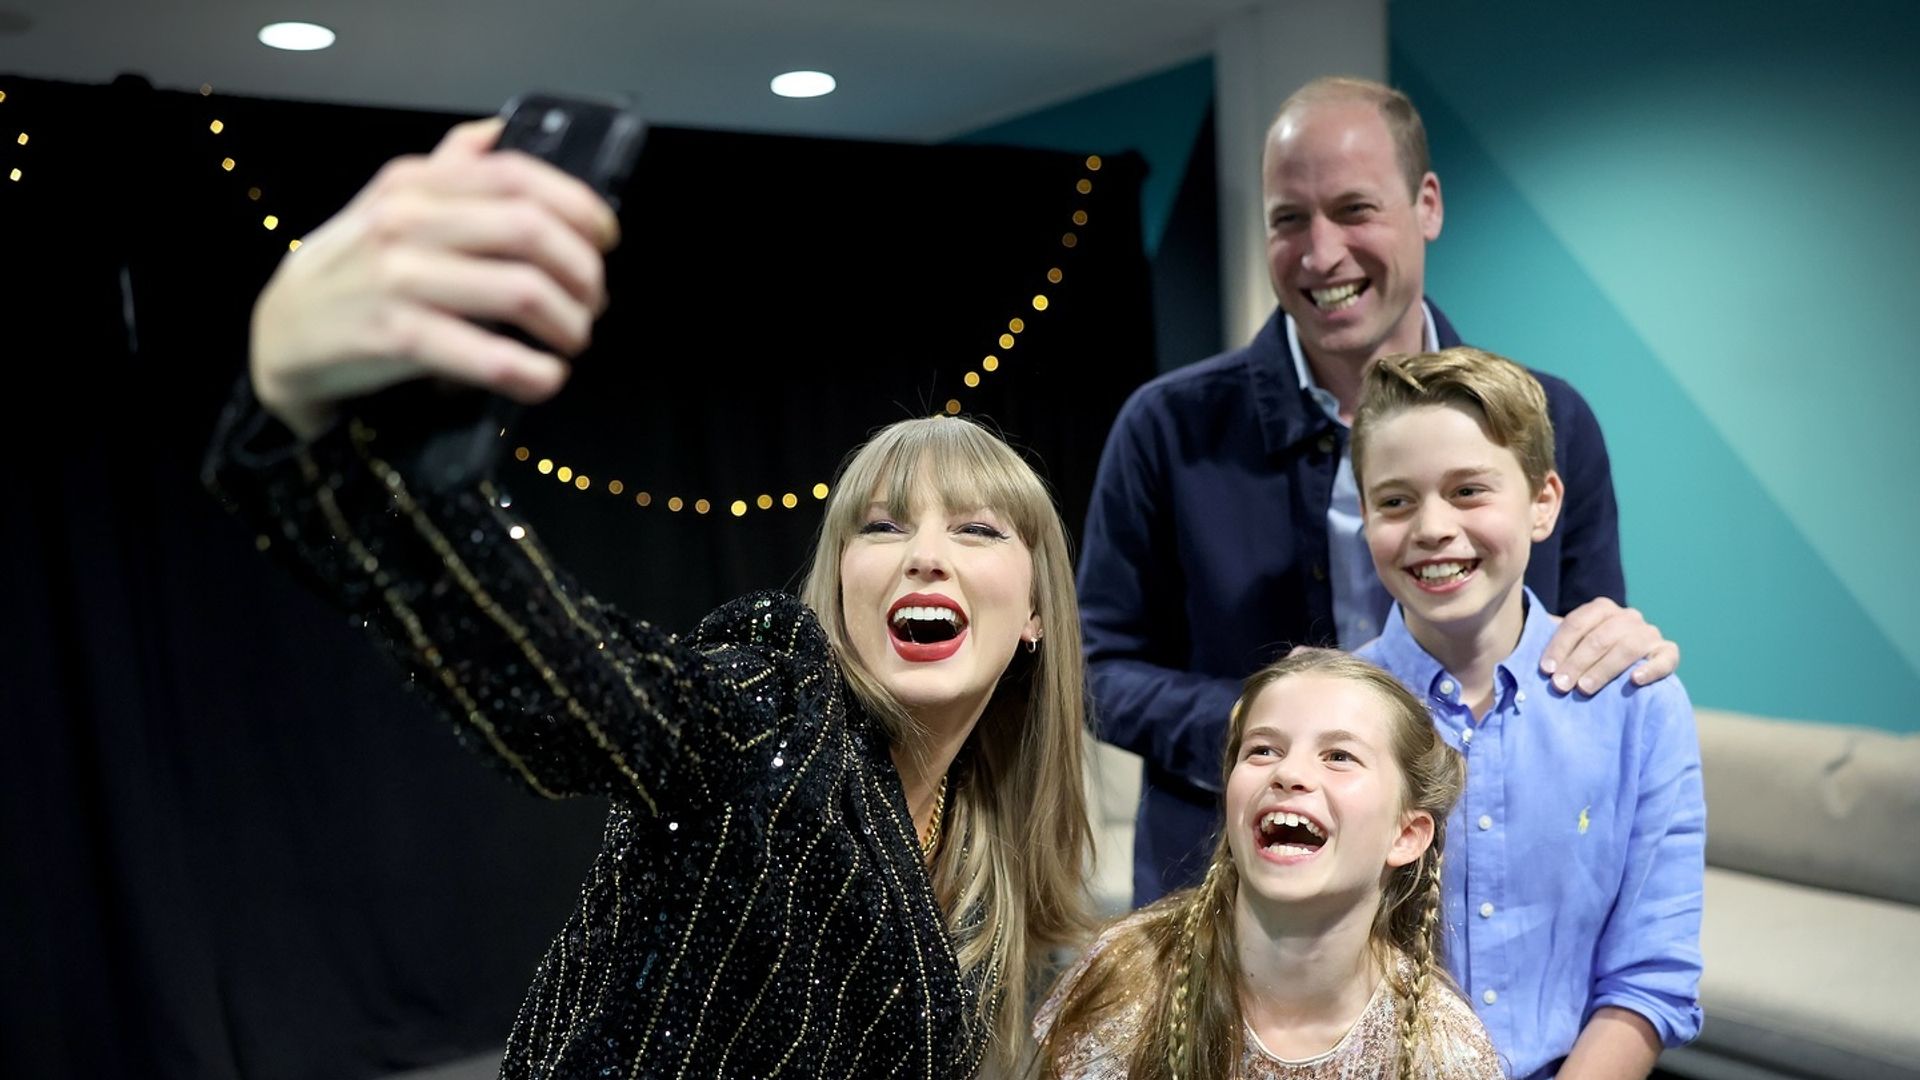 A photo of Prince George, Princess Charlotte, Prince William and Taylor Swift 